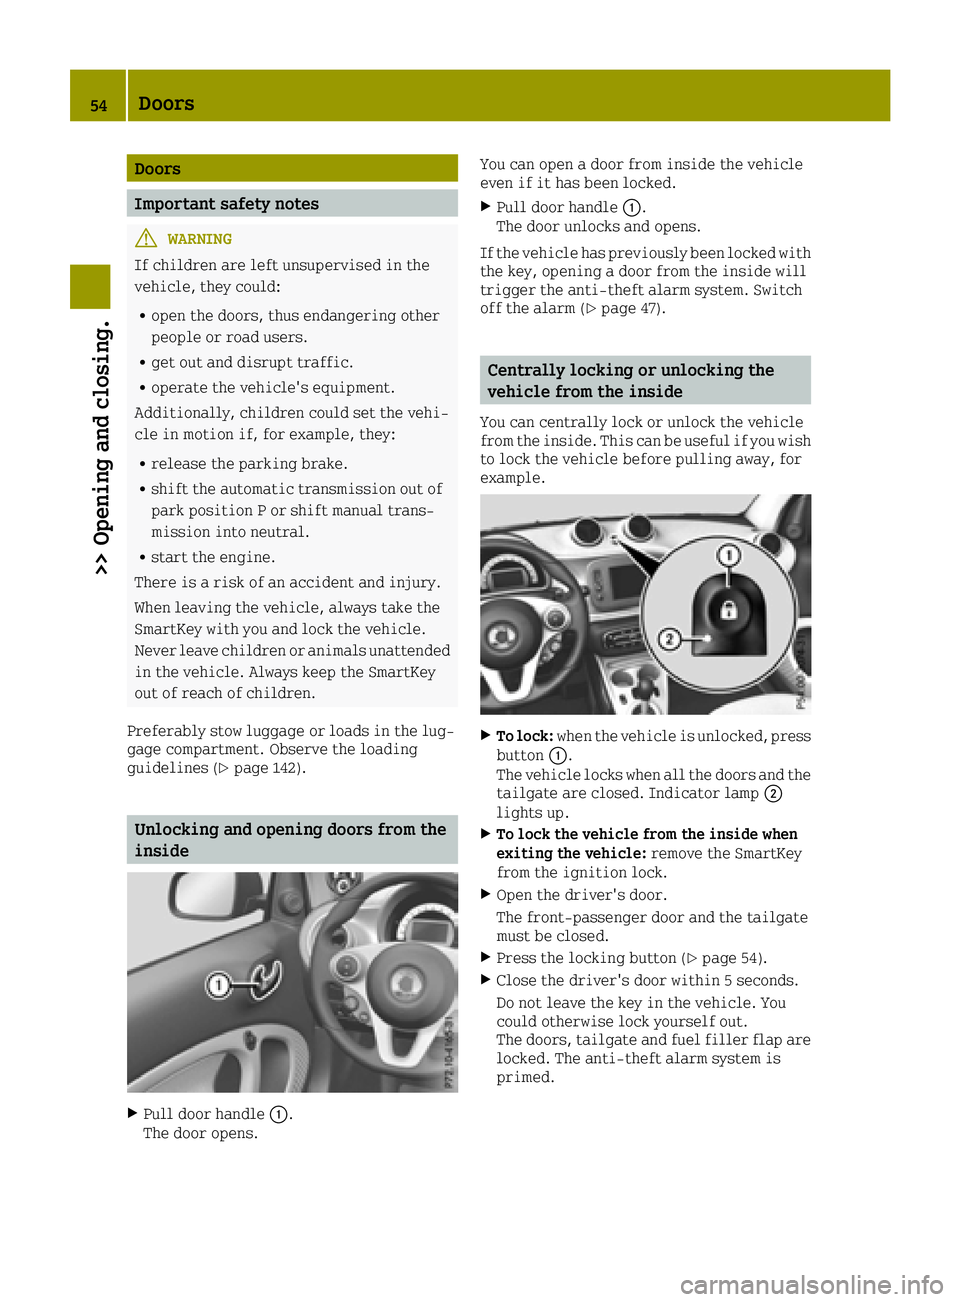 SMART FORTWO 2016 User Guide Doors
Important safety notes
GWARNING
If children are left unsupervised in the
vehicle, they could:
Ropen the doors, thus endangering other
people or road users.
Rget out and disrupt traffic.
Roperate